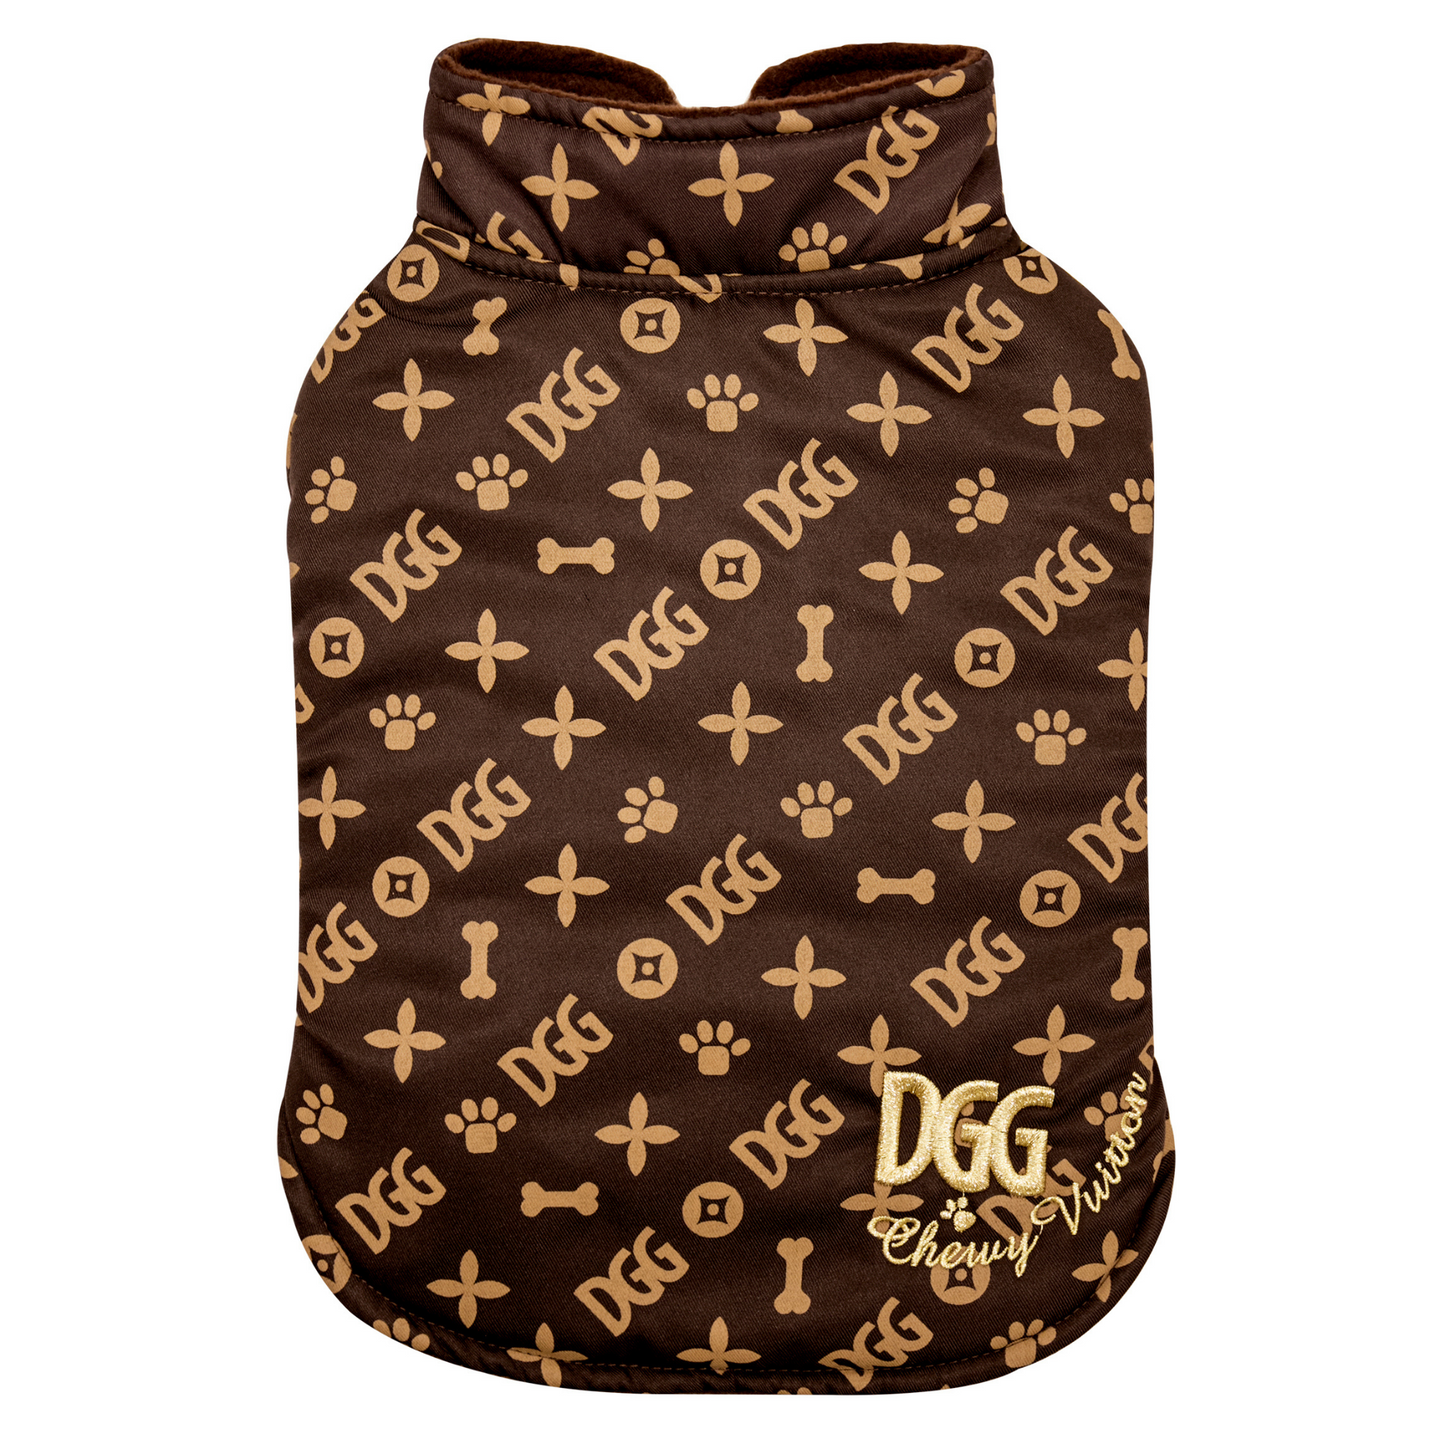 DGG Fashionista Chewy Vuitton Quilted Dog Coat